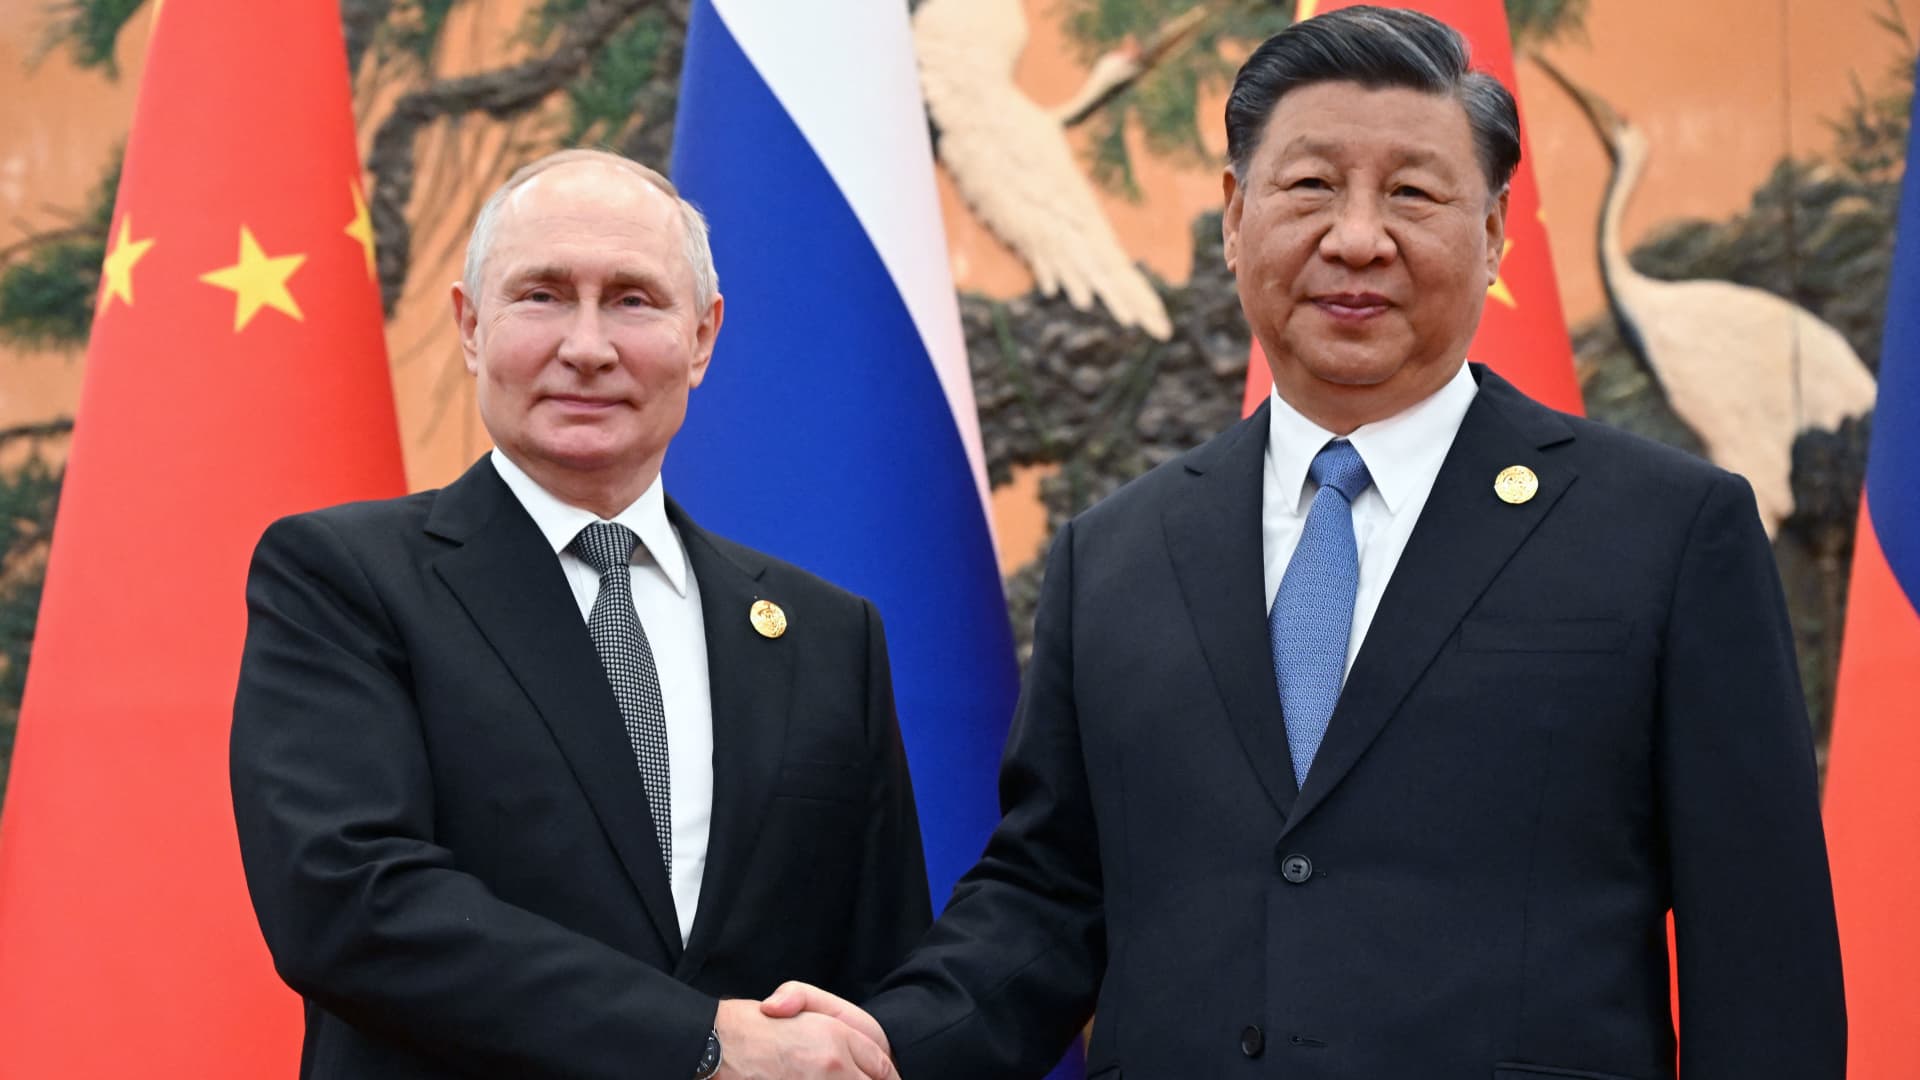 Russia's President Vladimir Putin and Chinese President Xi Jinping shake hands during a meeting in Beijing on October 18, 2023.